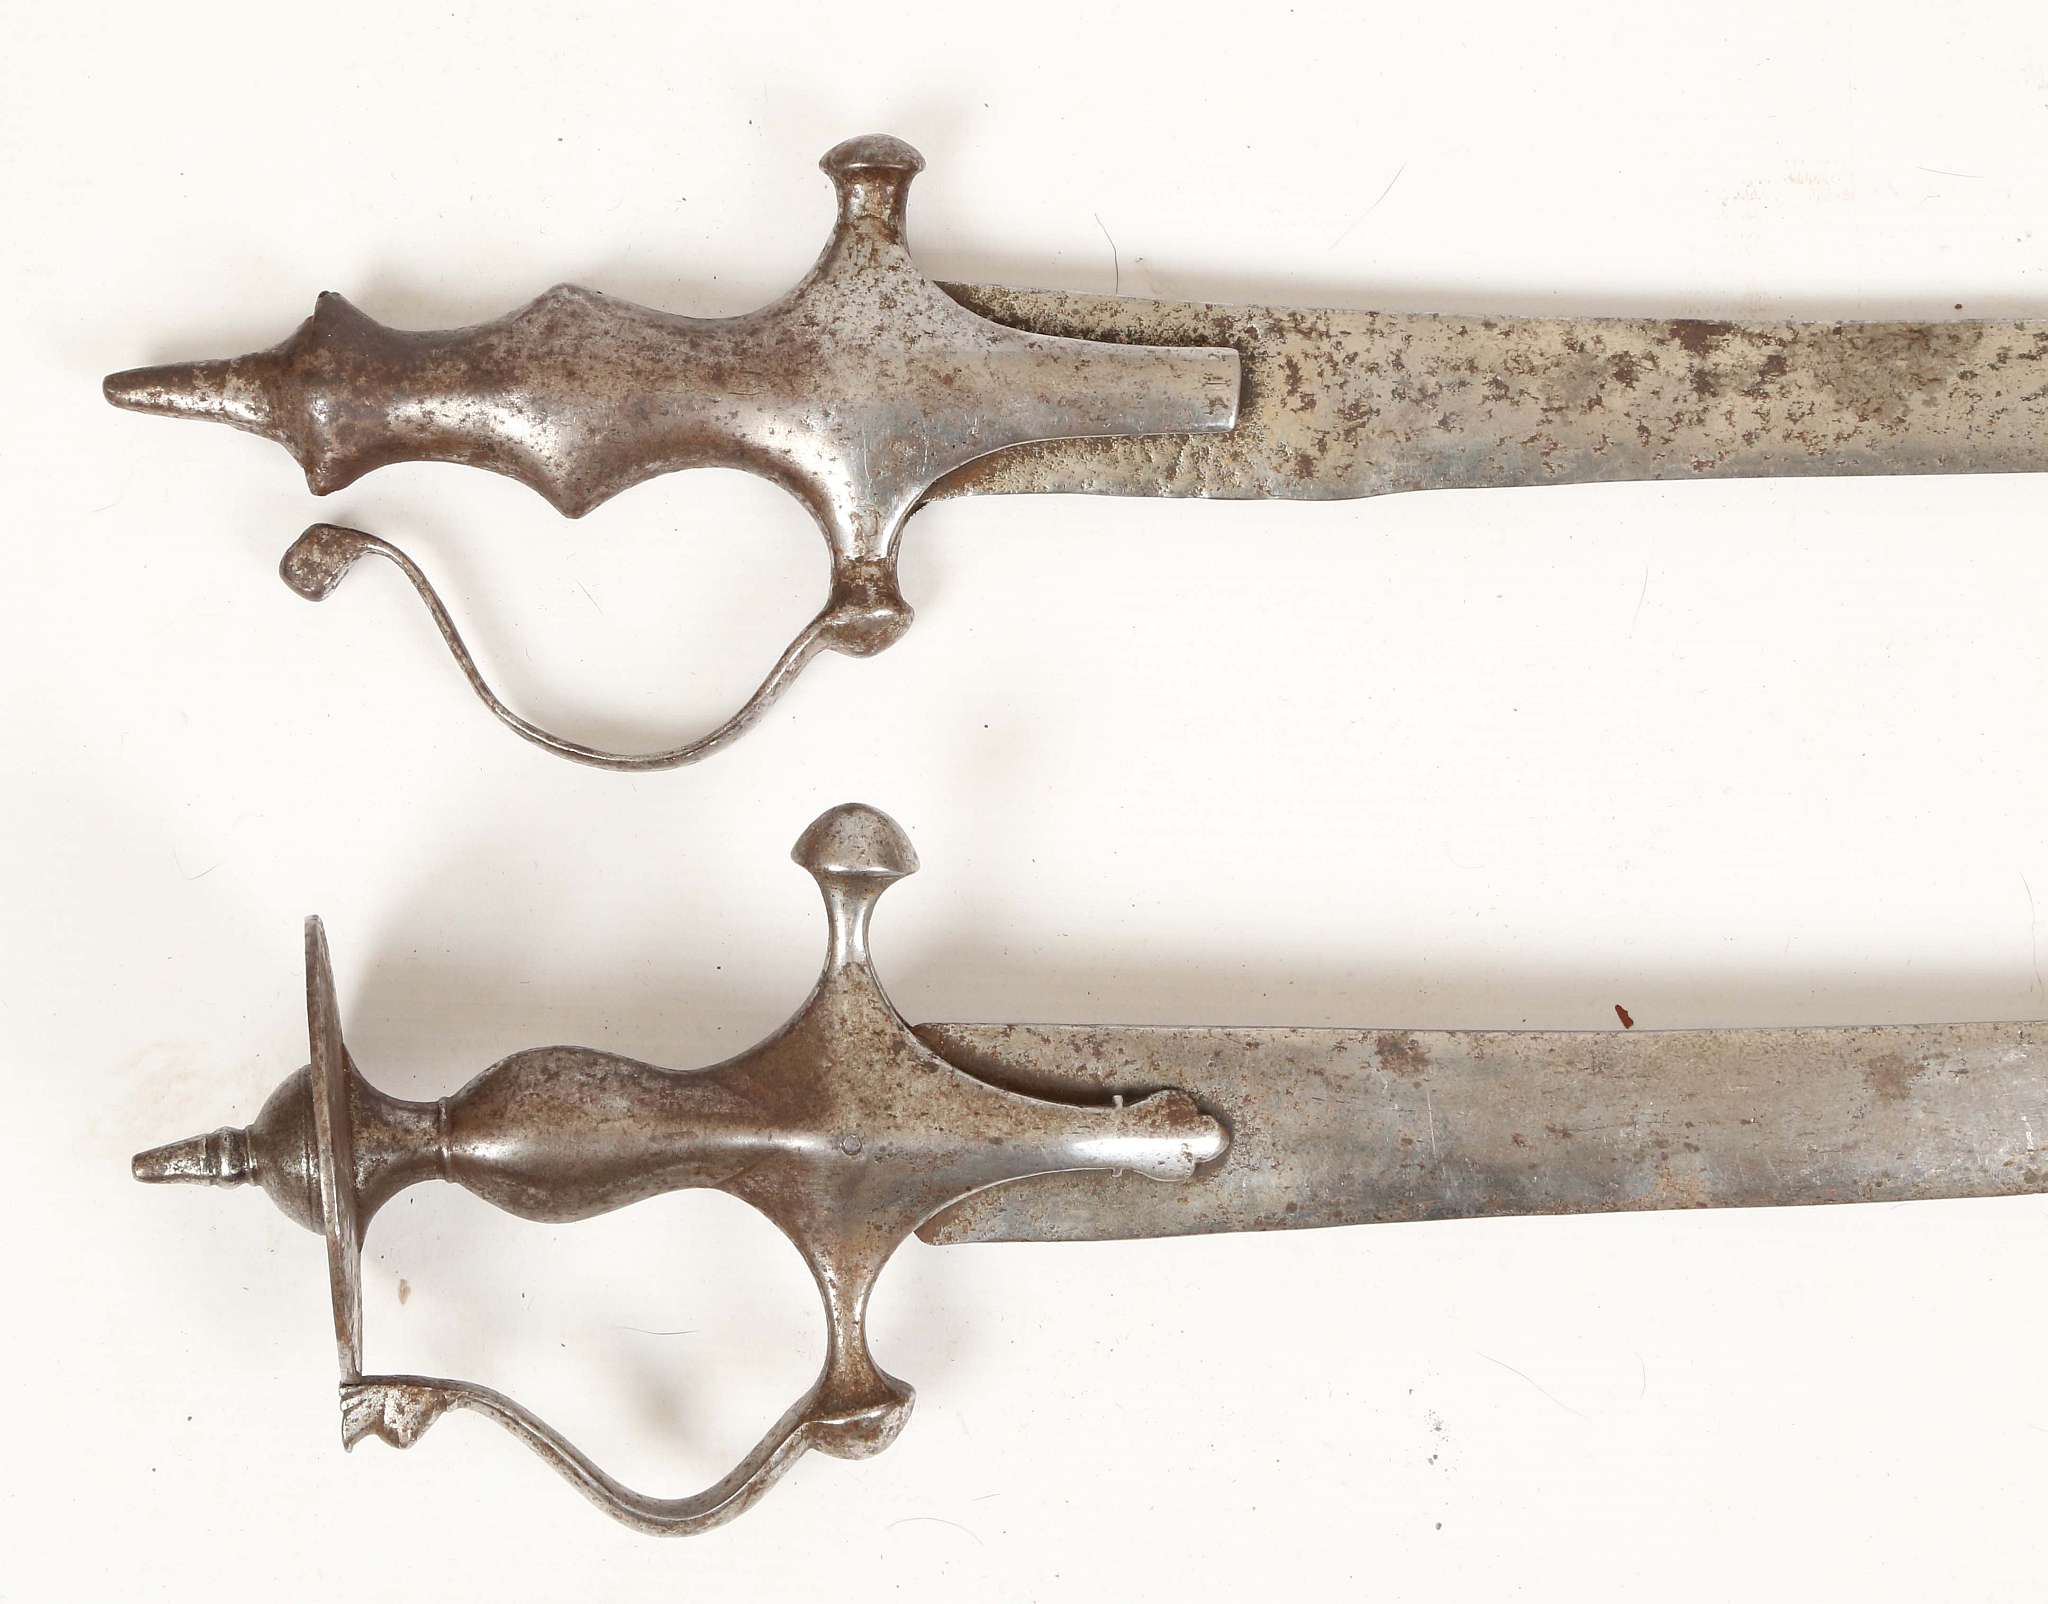 Two 19th century Indian Talwar swords; disc pommel, steel grip, knuckle guard and quillon, 81cm - Image 2 of 3